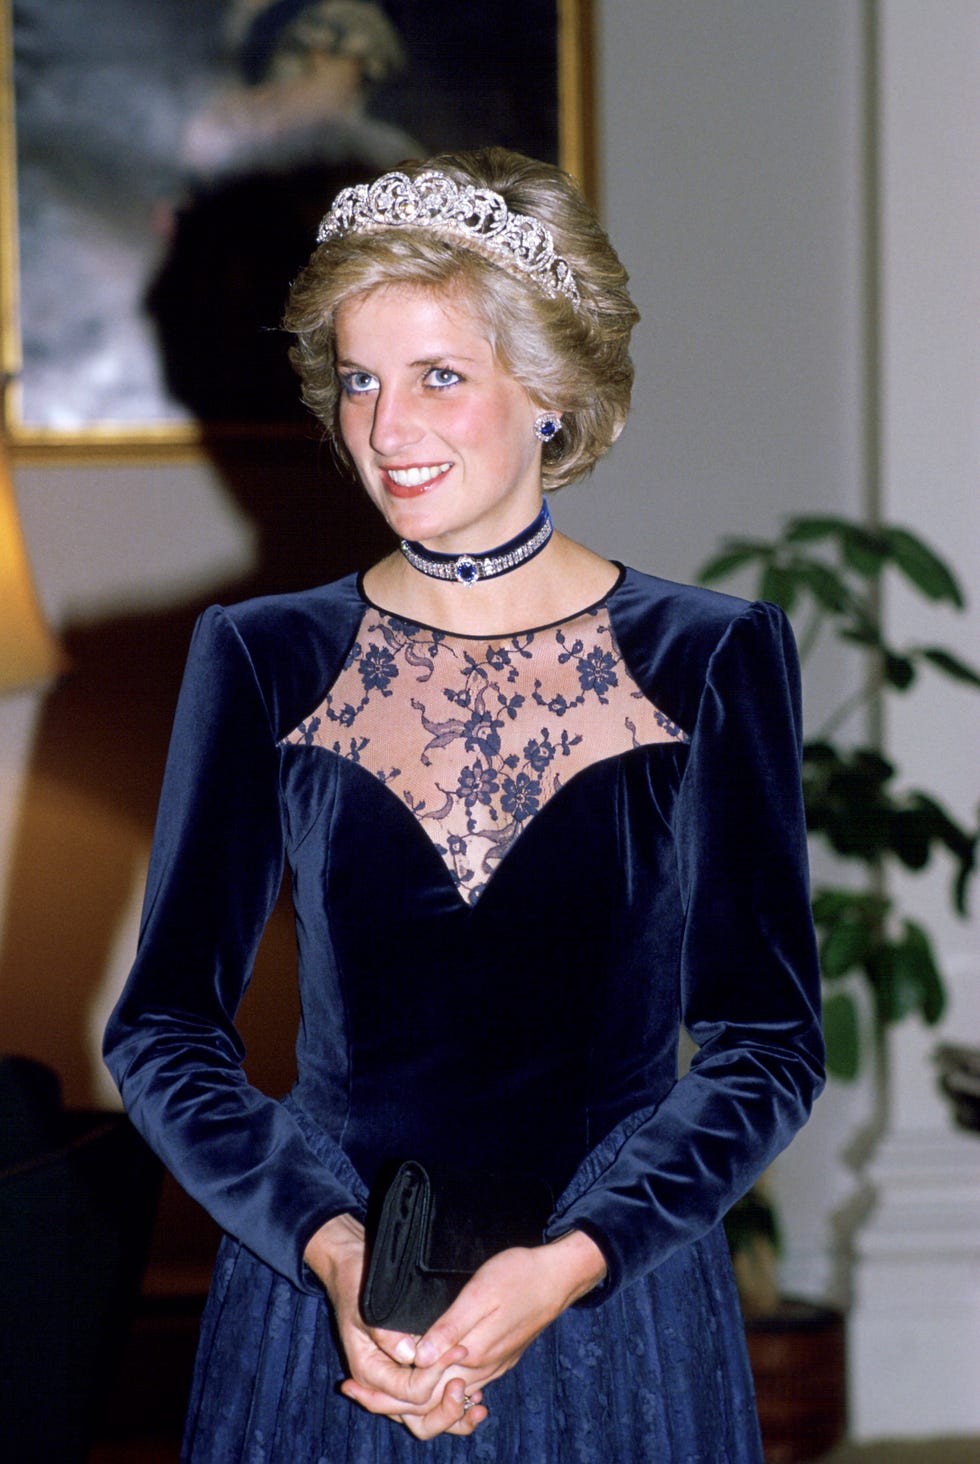 melbourne, australia   november 06  princess diana in melbourne attending a state dinner at government house during a royal tour of australia she is wearing the spencer tiara  photo by tim graham photo library via getty images